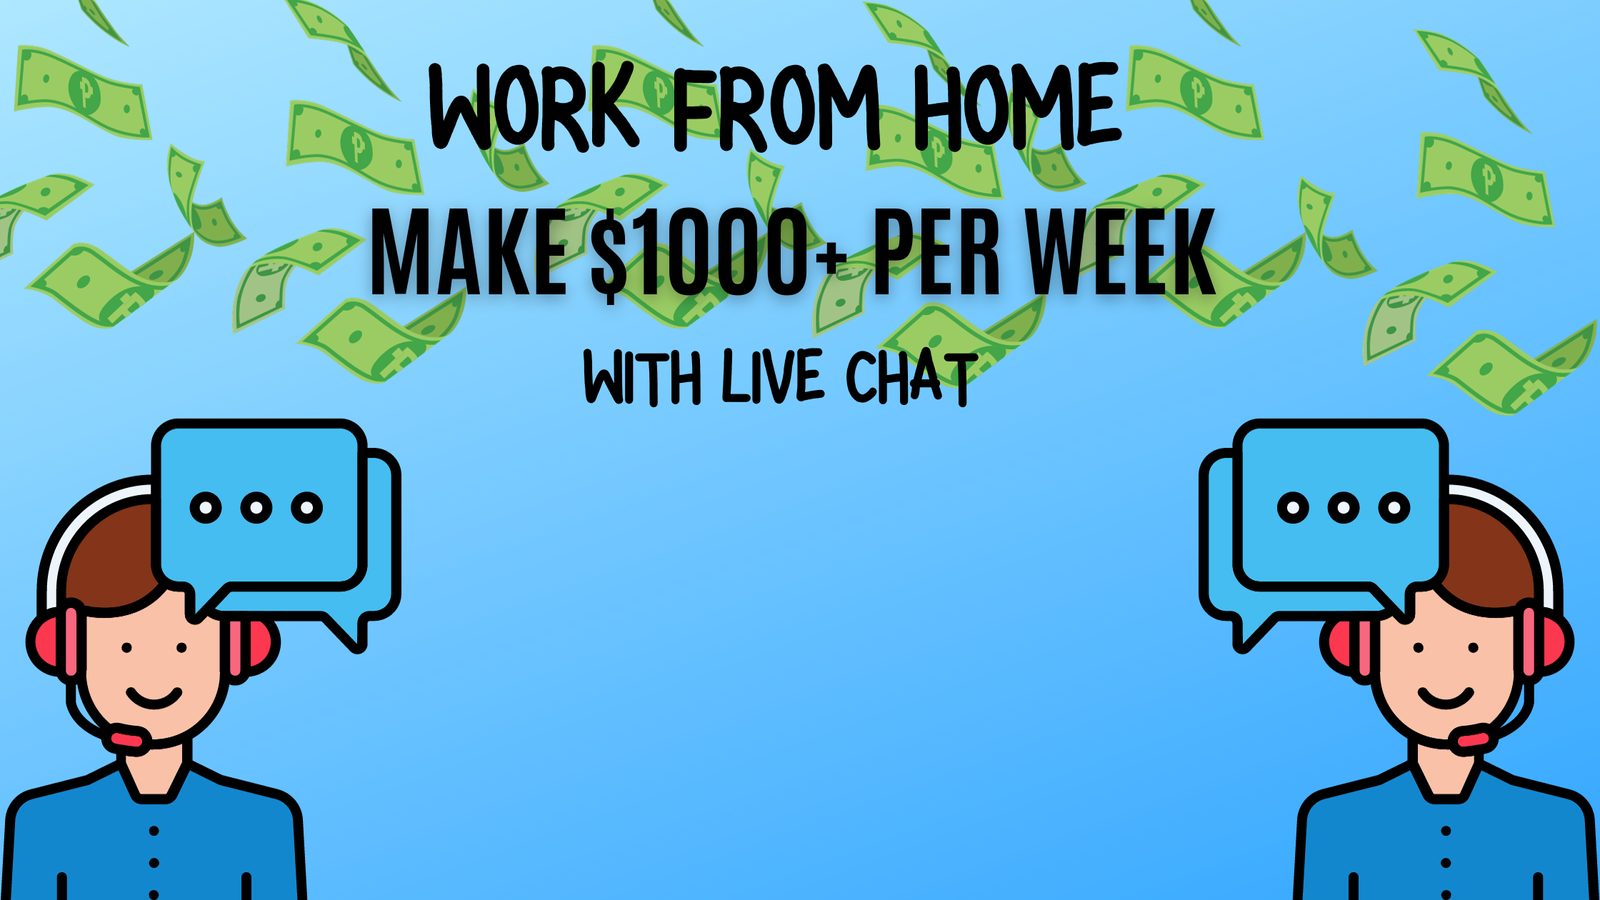 WORK FROM HOME MAKE $1000+ PER WEEK WITH LIVE CHAT